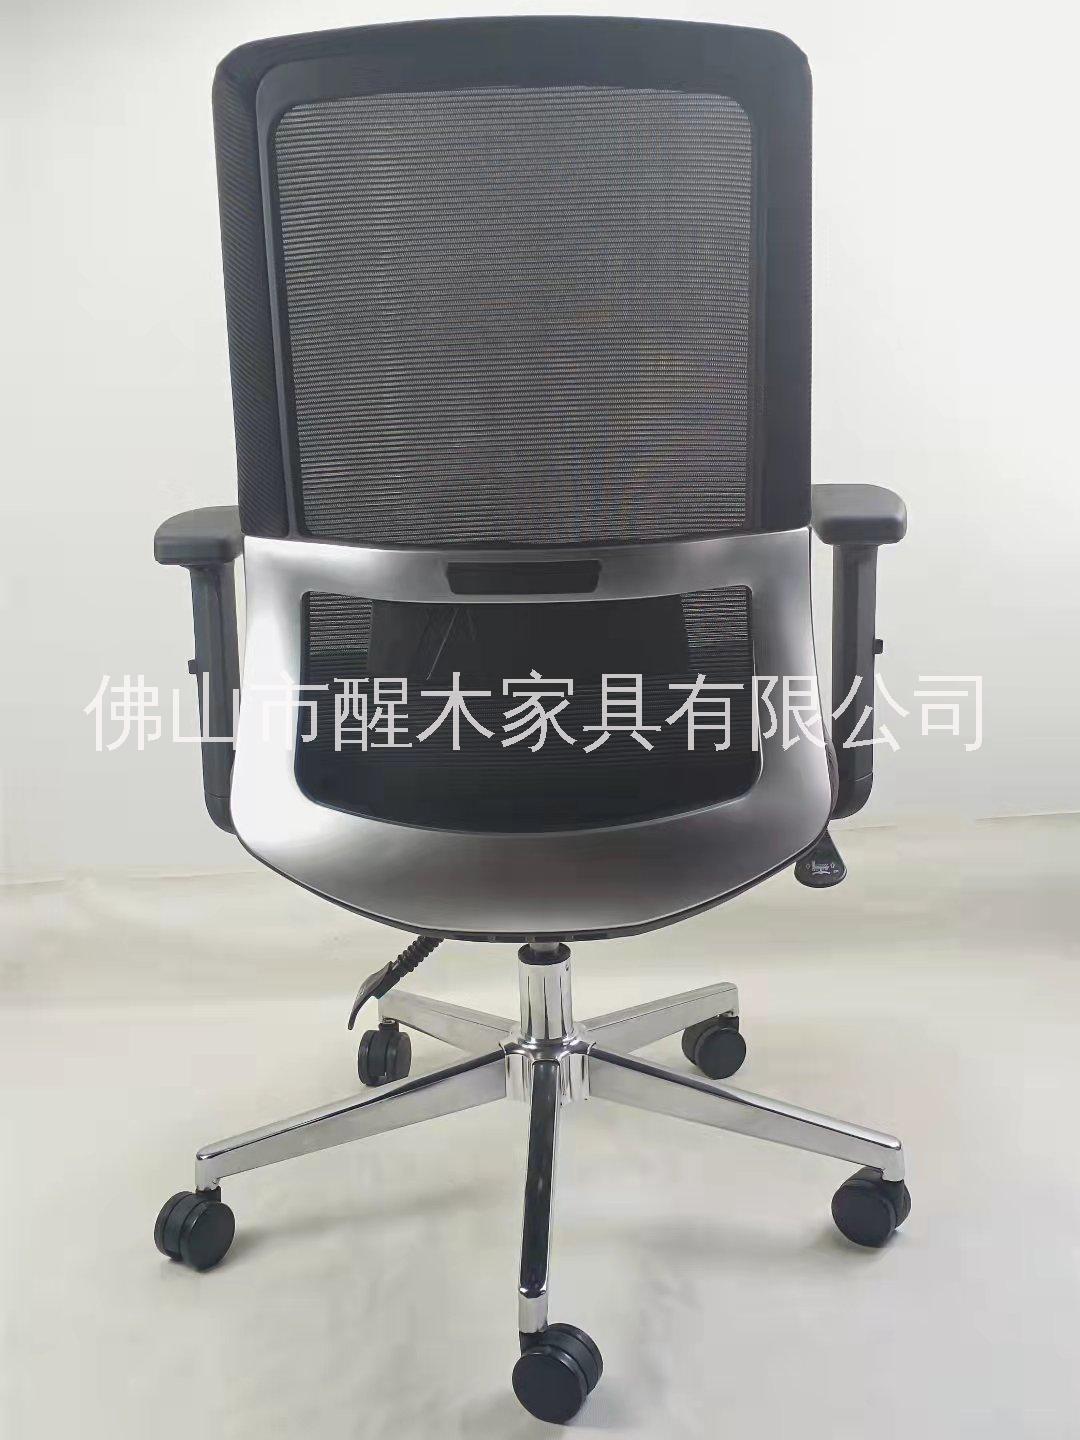 gaming chair Computer chair Home office chair lounge ch电脑椅家用图片